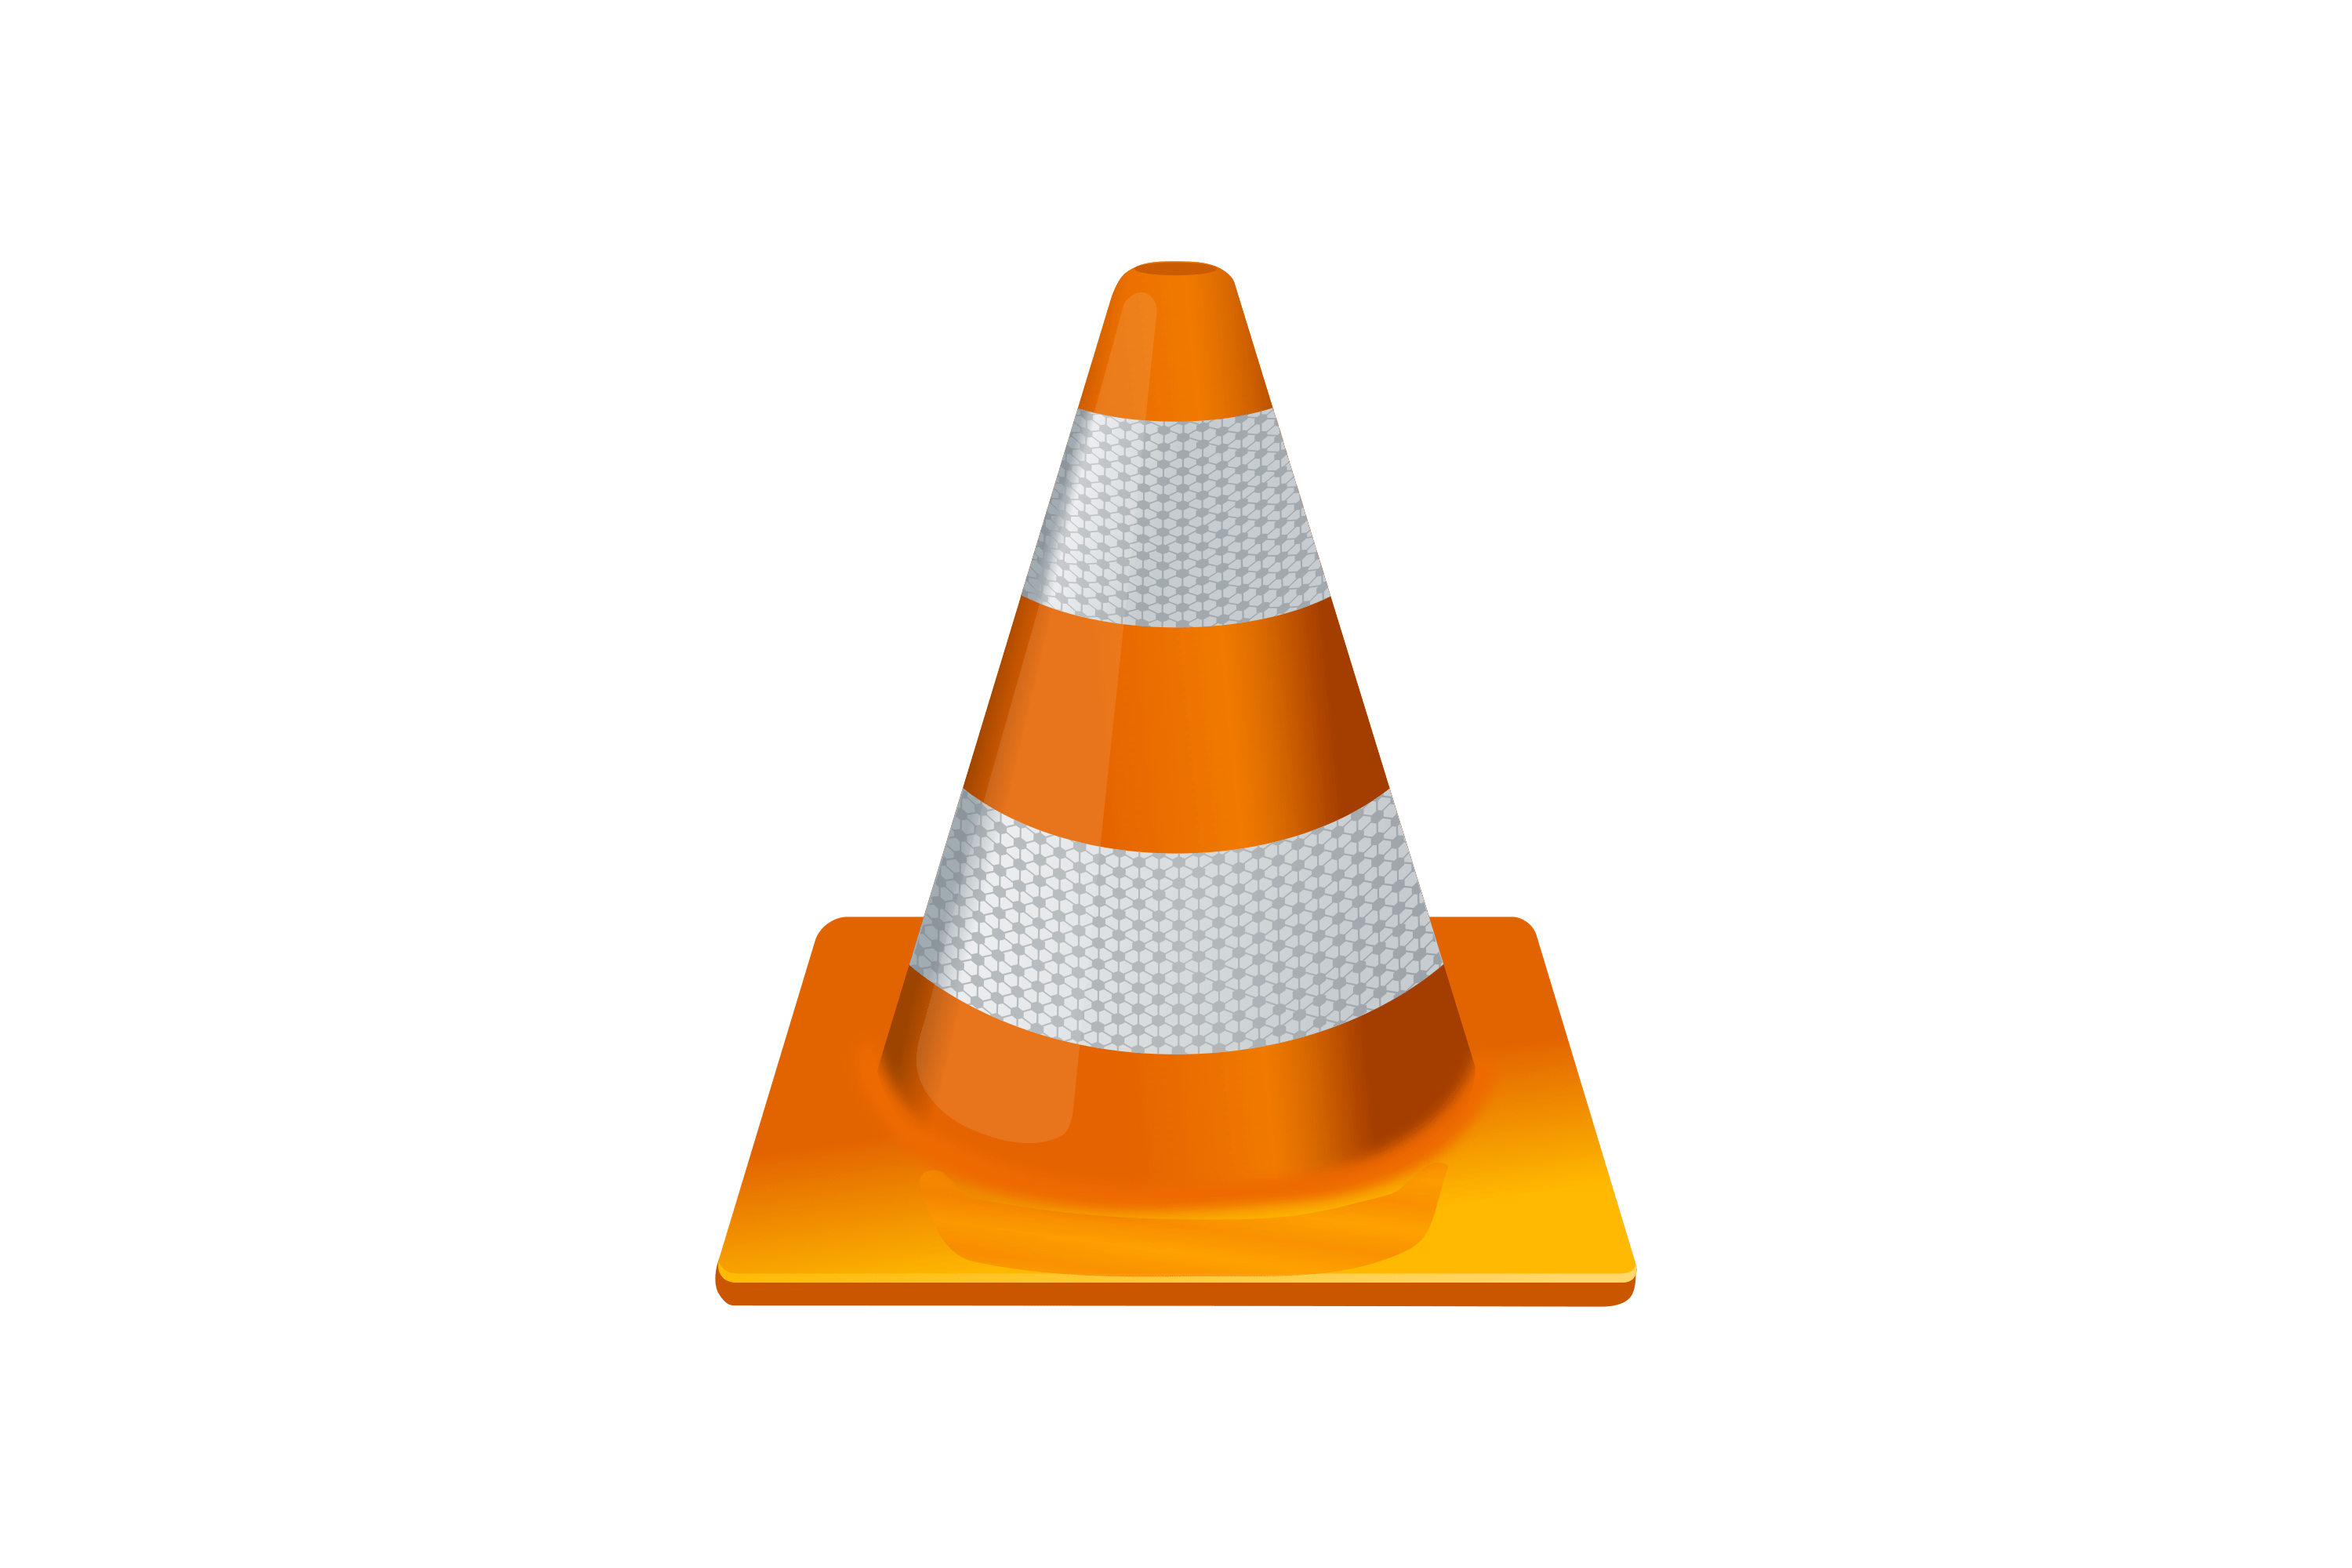 vlc media player stops and starts